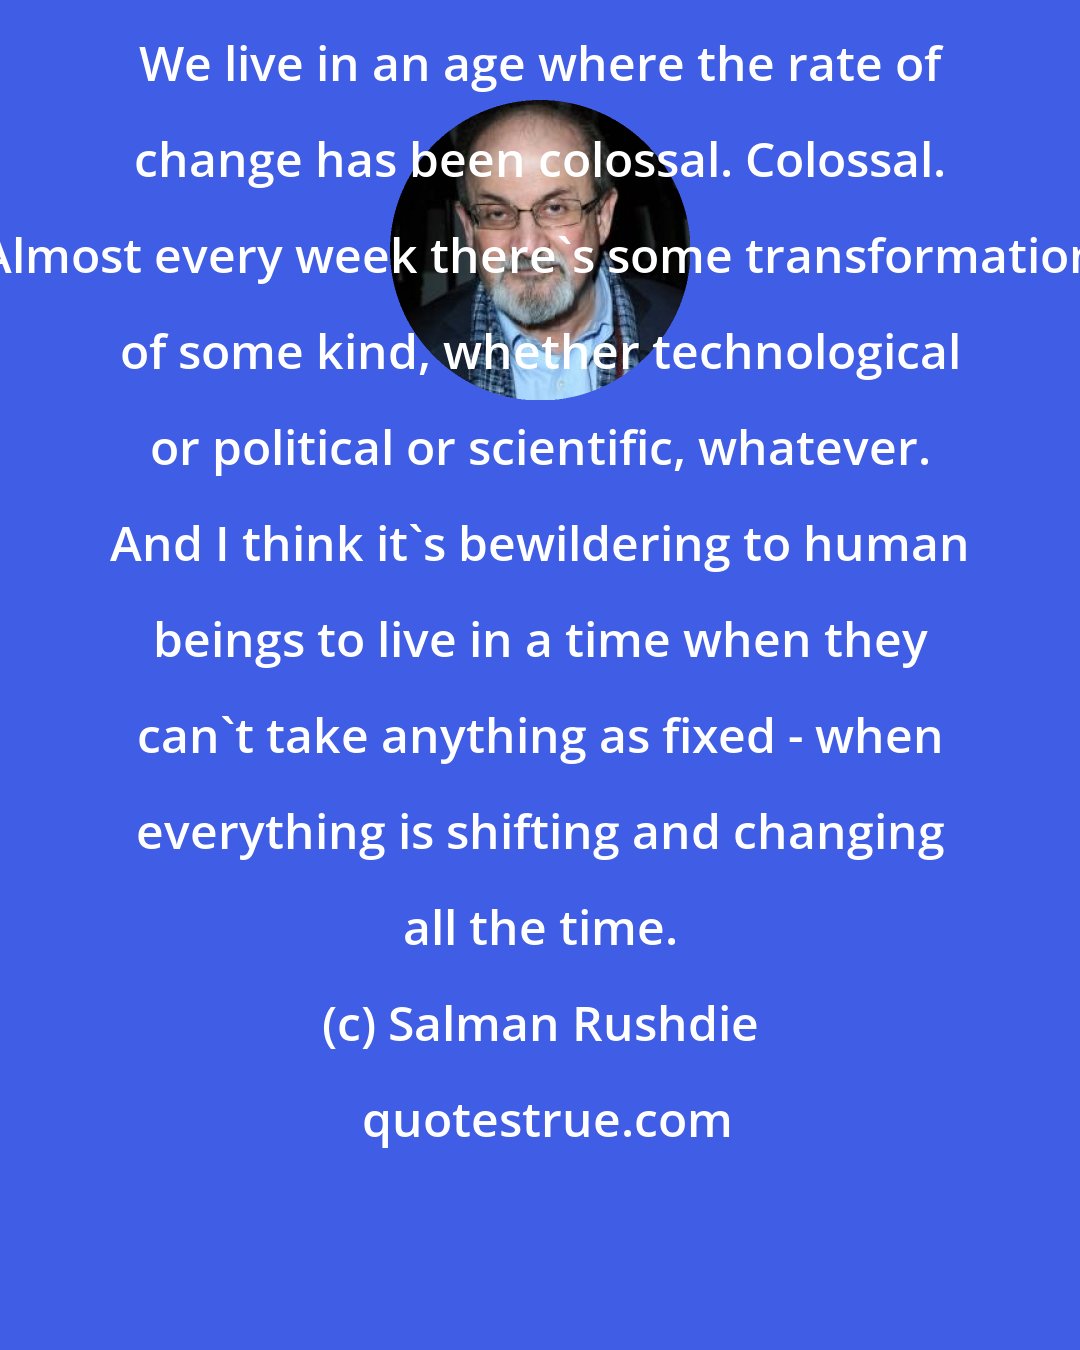 Salman Rushdie: We live in an age where the rate of change has been colossal. Colossal. Almost every week there's some transformation of some kind, whether technological or political or scientific, whatever. And I think it's bewildering to human beings to live in a time when they can't take anything as fixed - when everything is shifting and changing all the time.